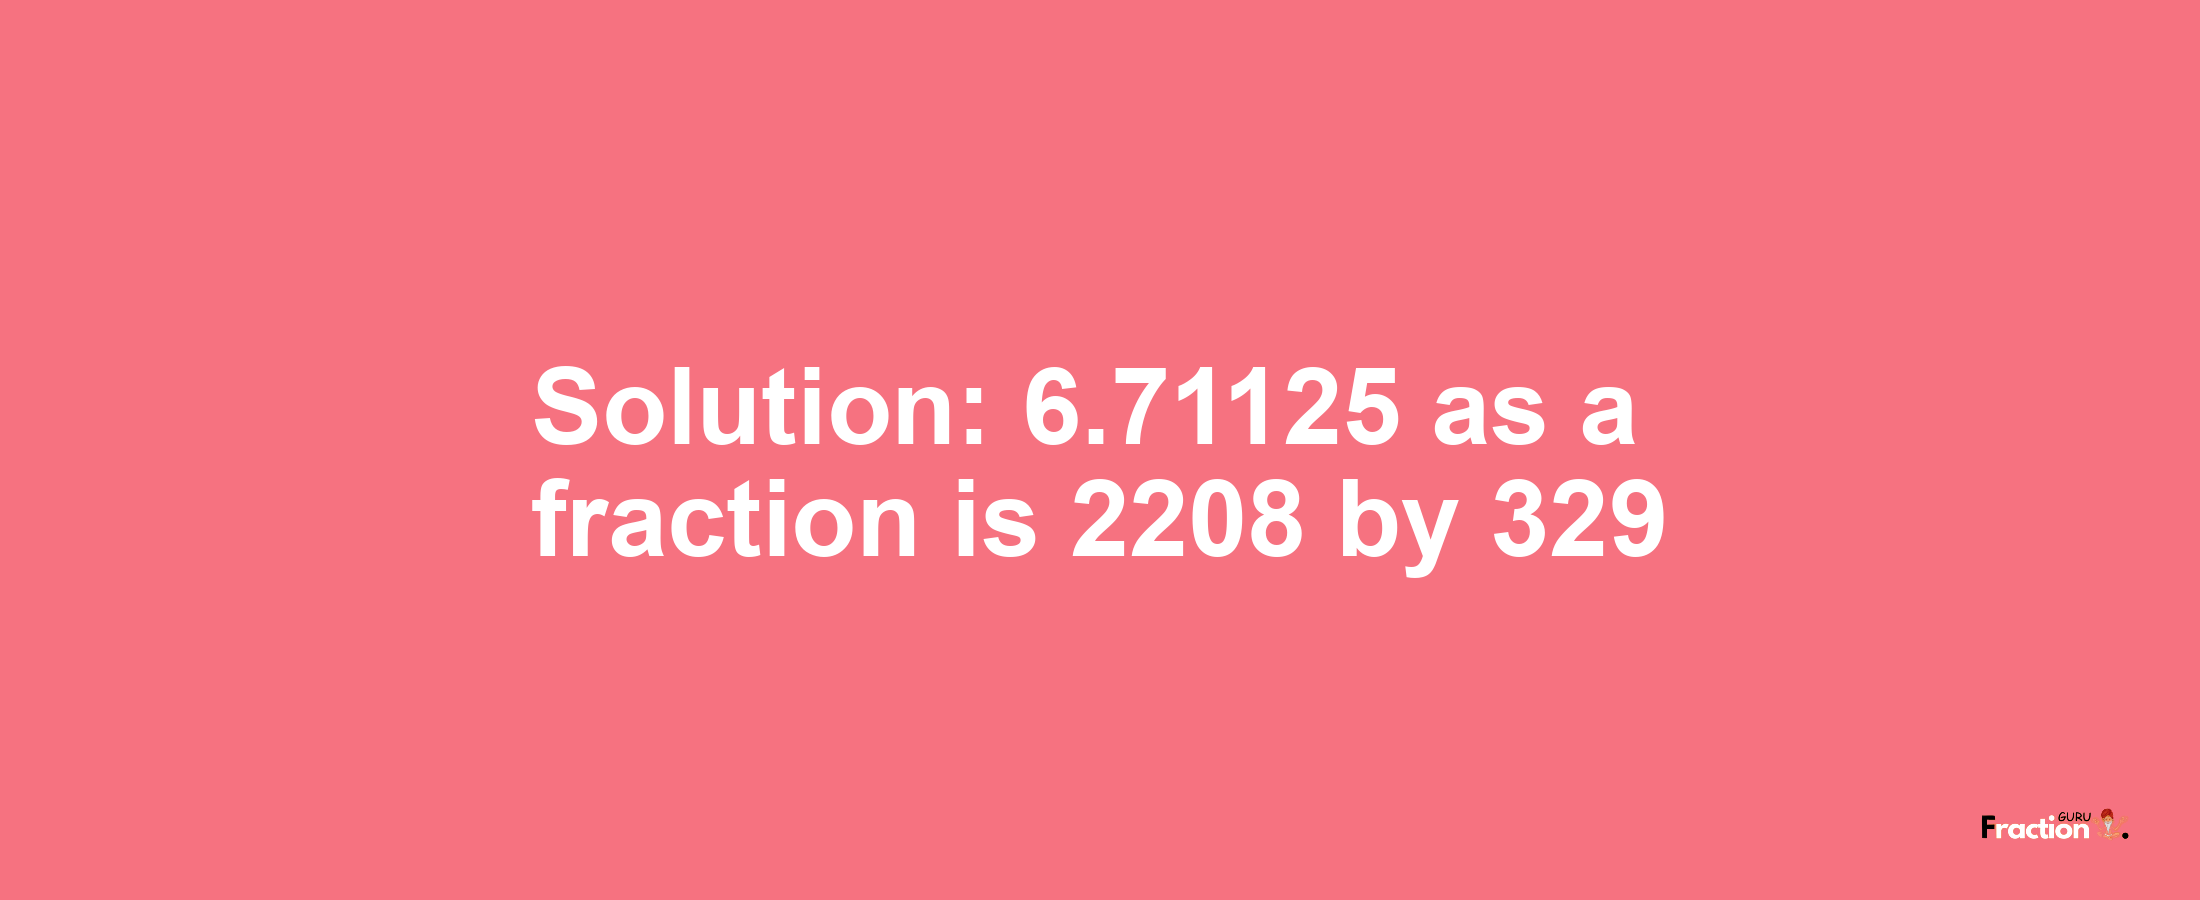 Solution:6.71125 as a fraction is 2208/329